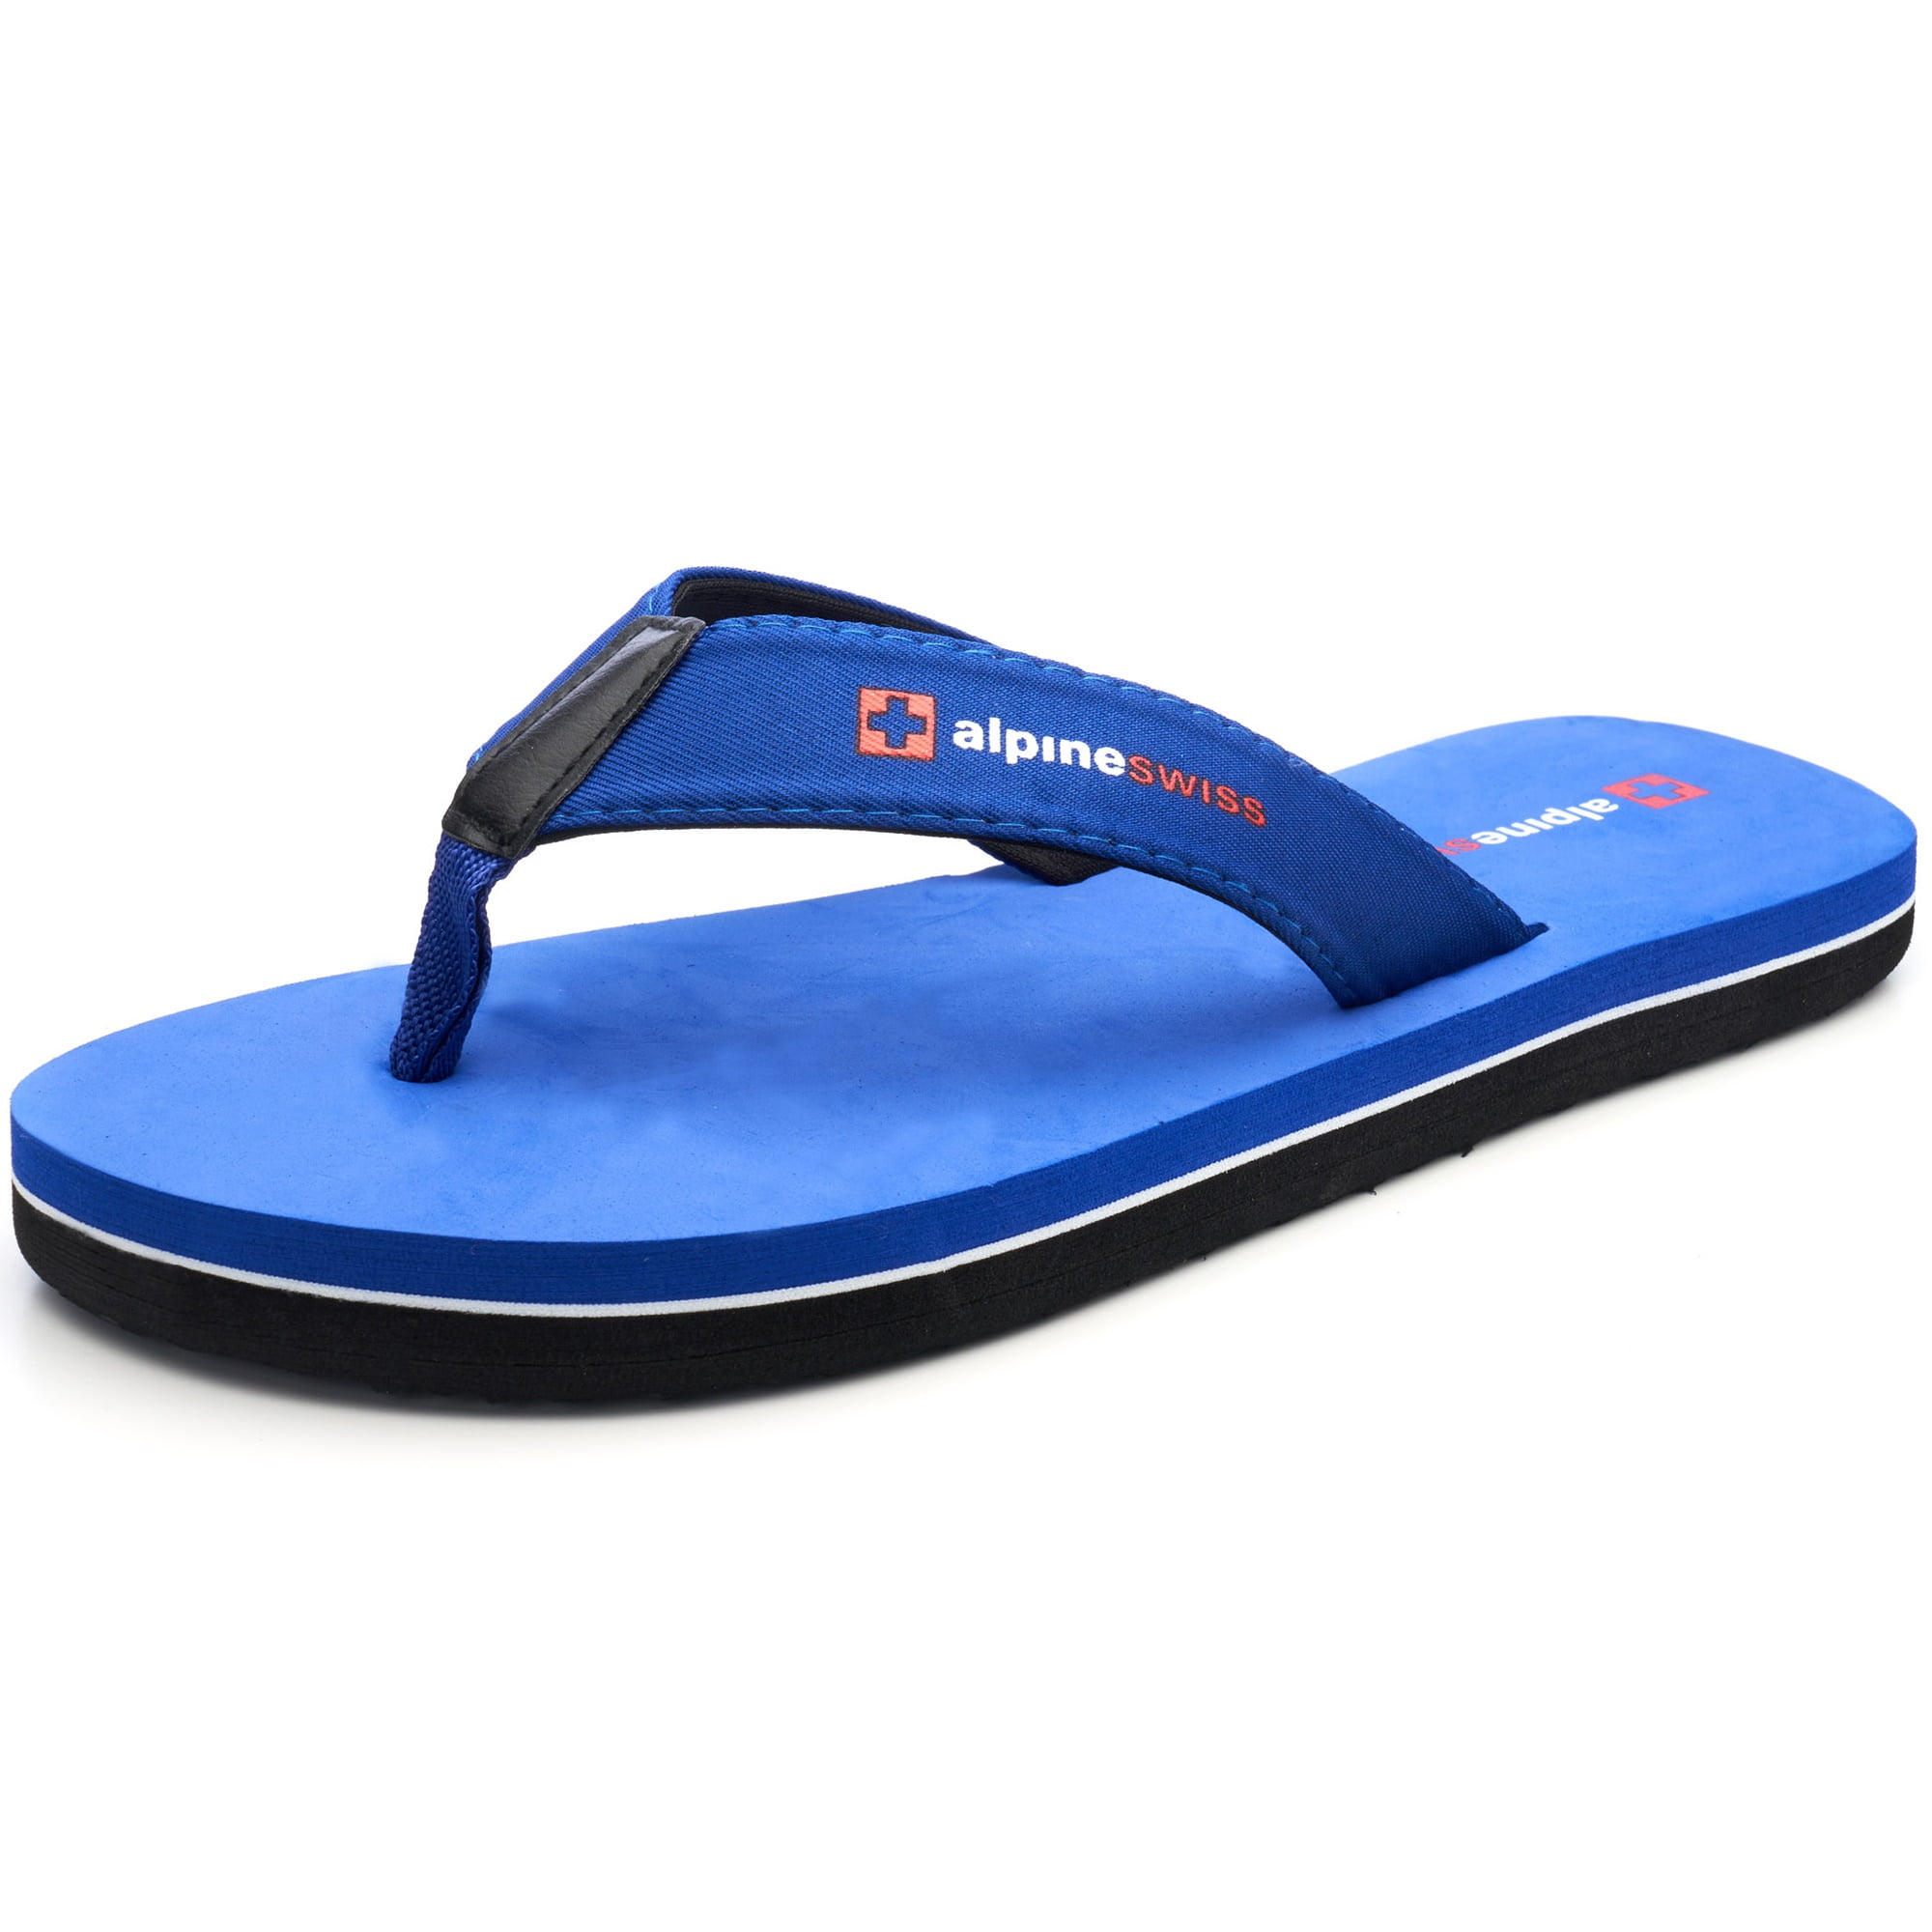 Men's Flip Flops Arch Support Sandals Casual Beach Shower Slipers with EVA Sole 